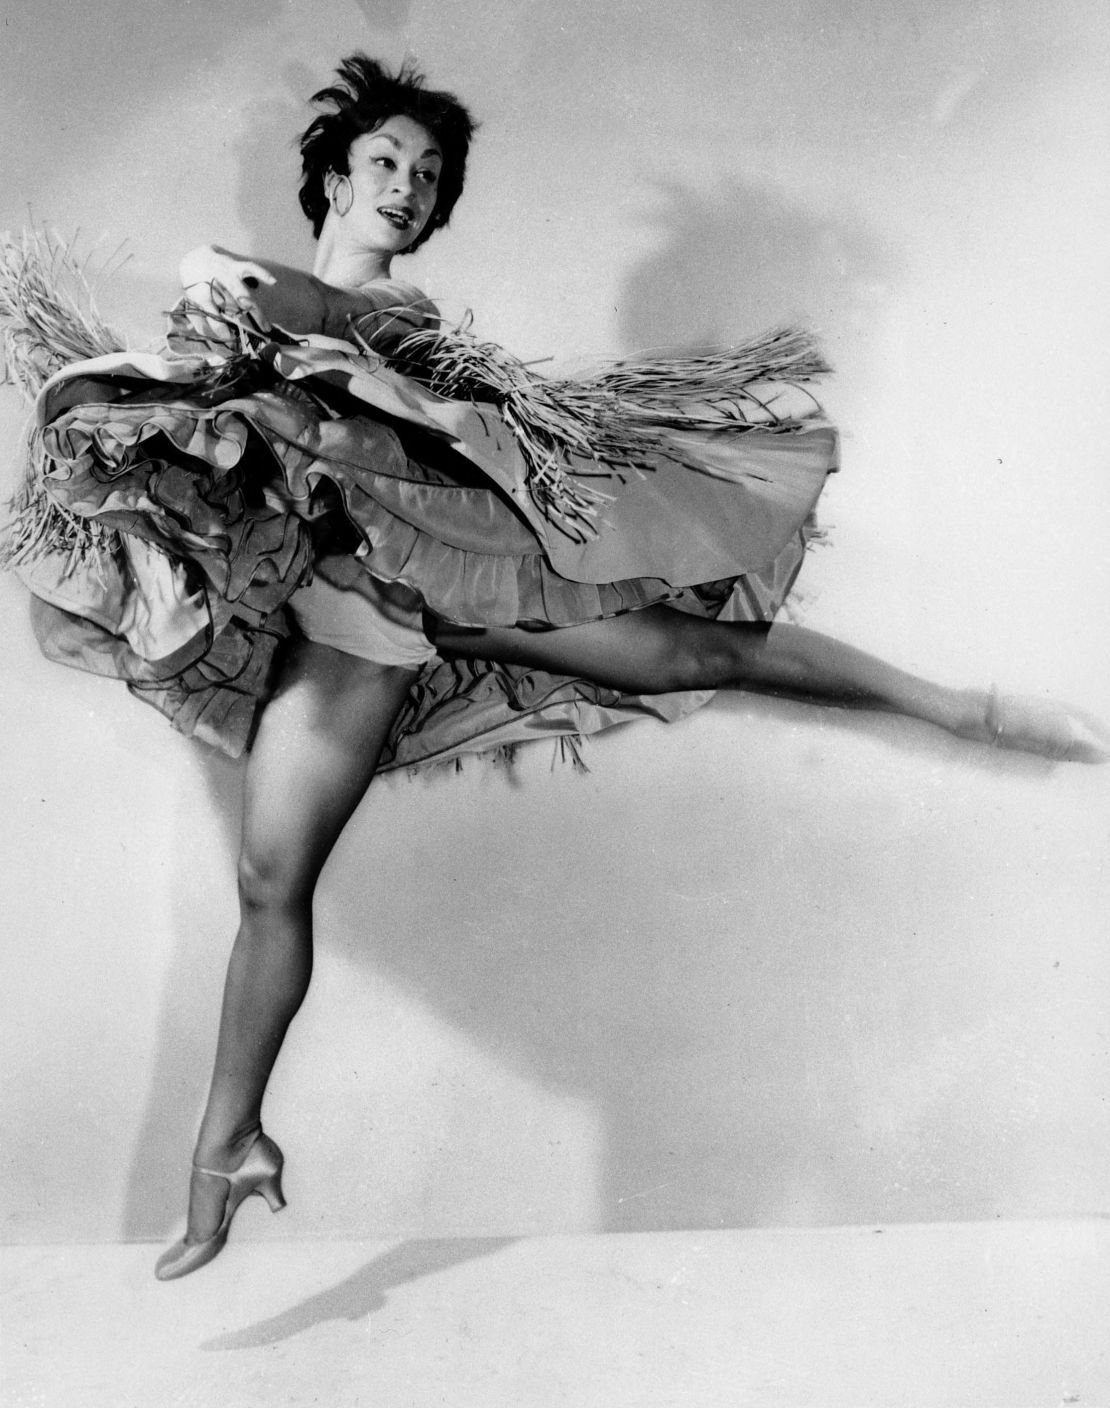 ** FILE ** In this 1957 file photo, Chita Rivera, the original cast member in the Broadway musical production of "West Side Story," is shown.